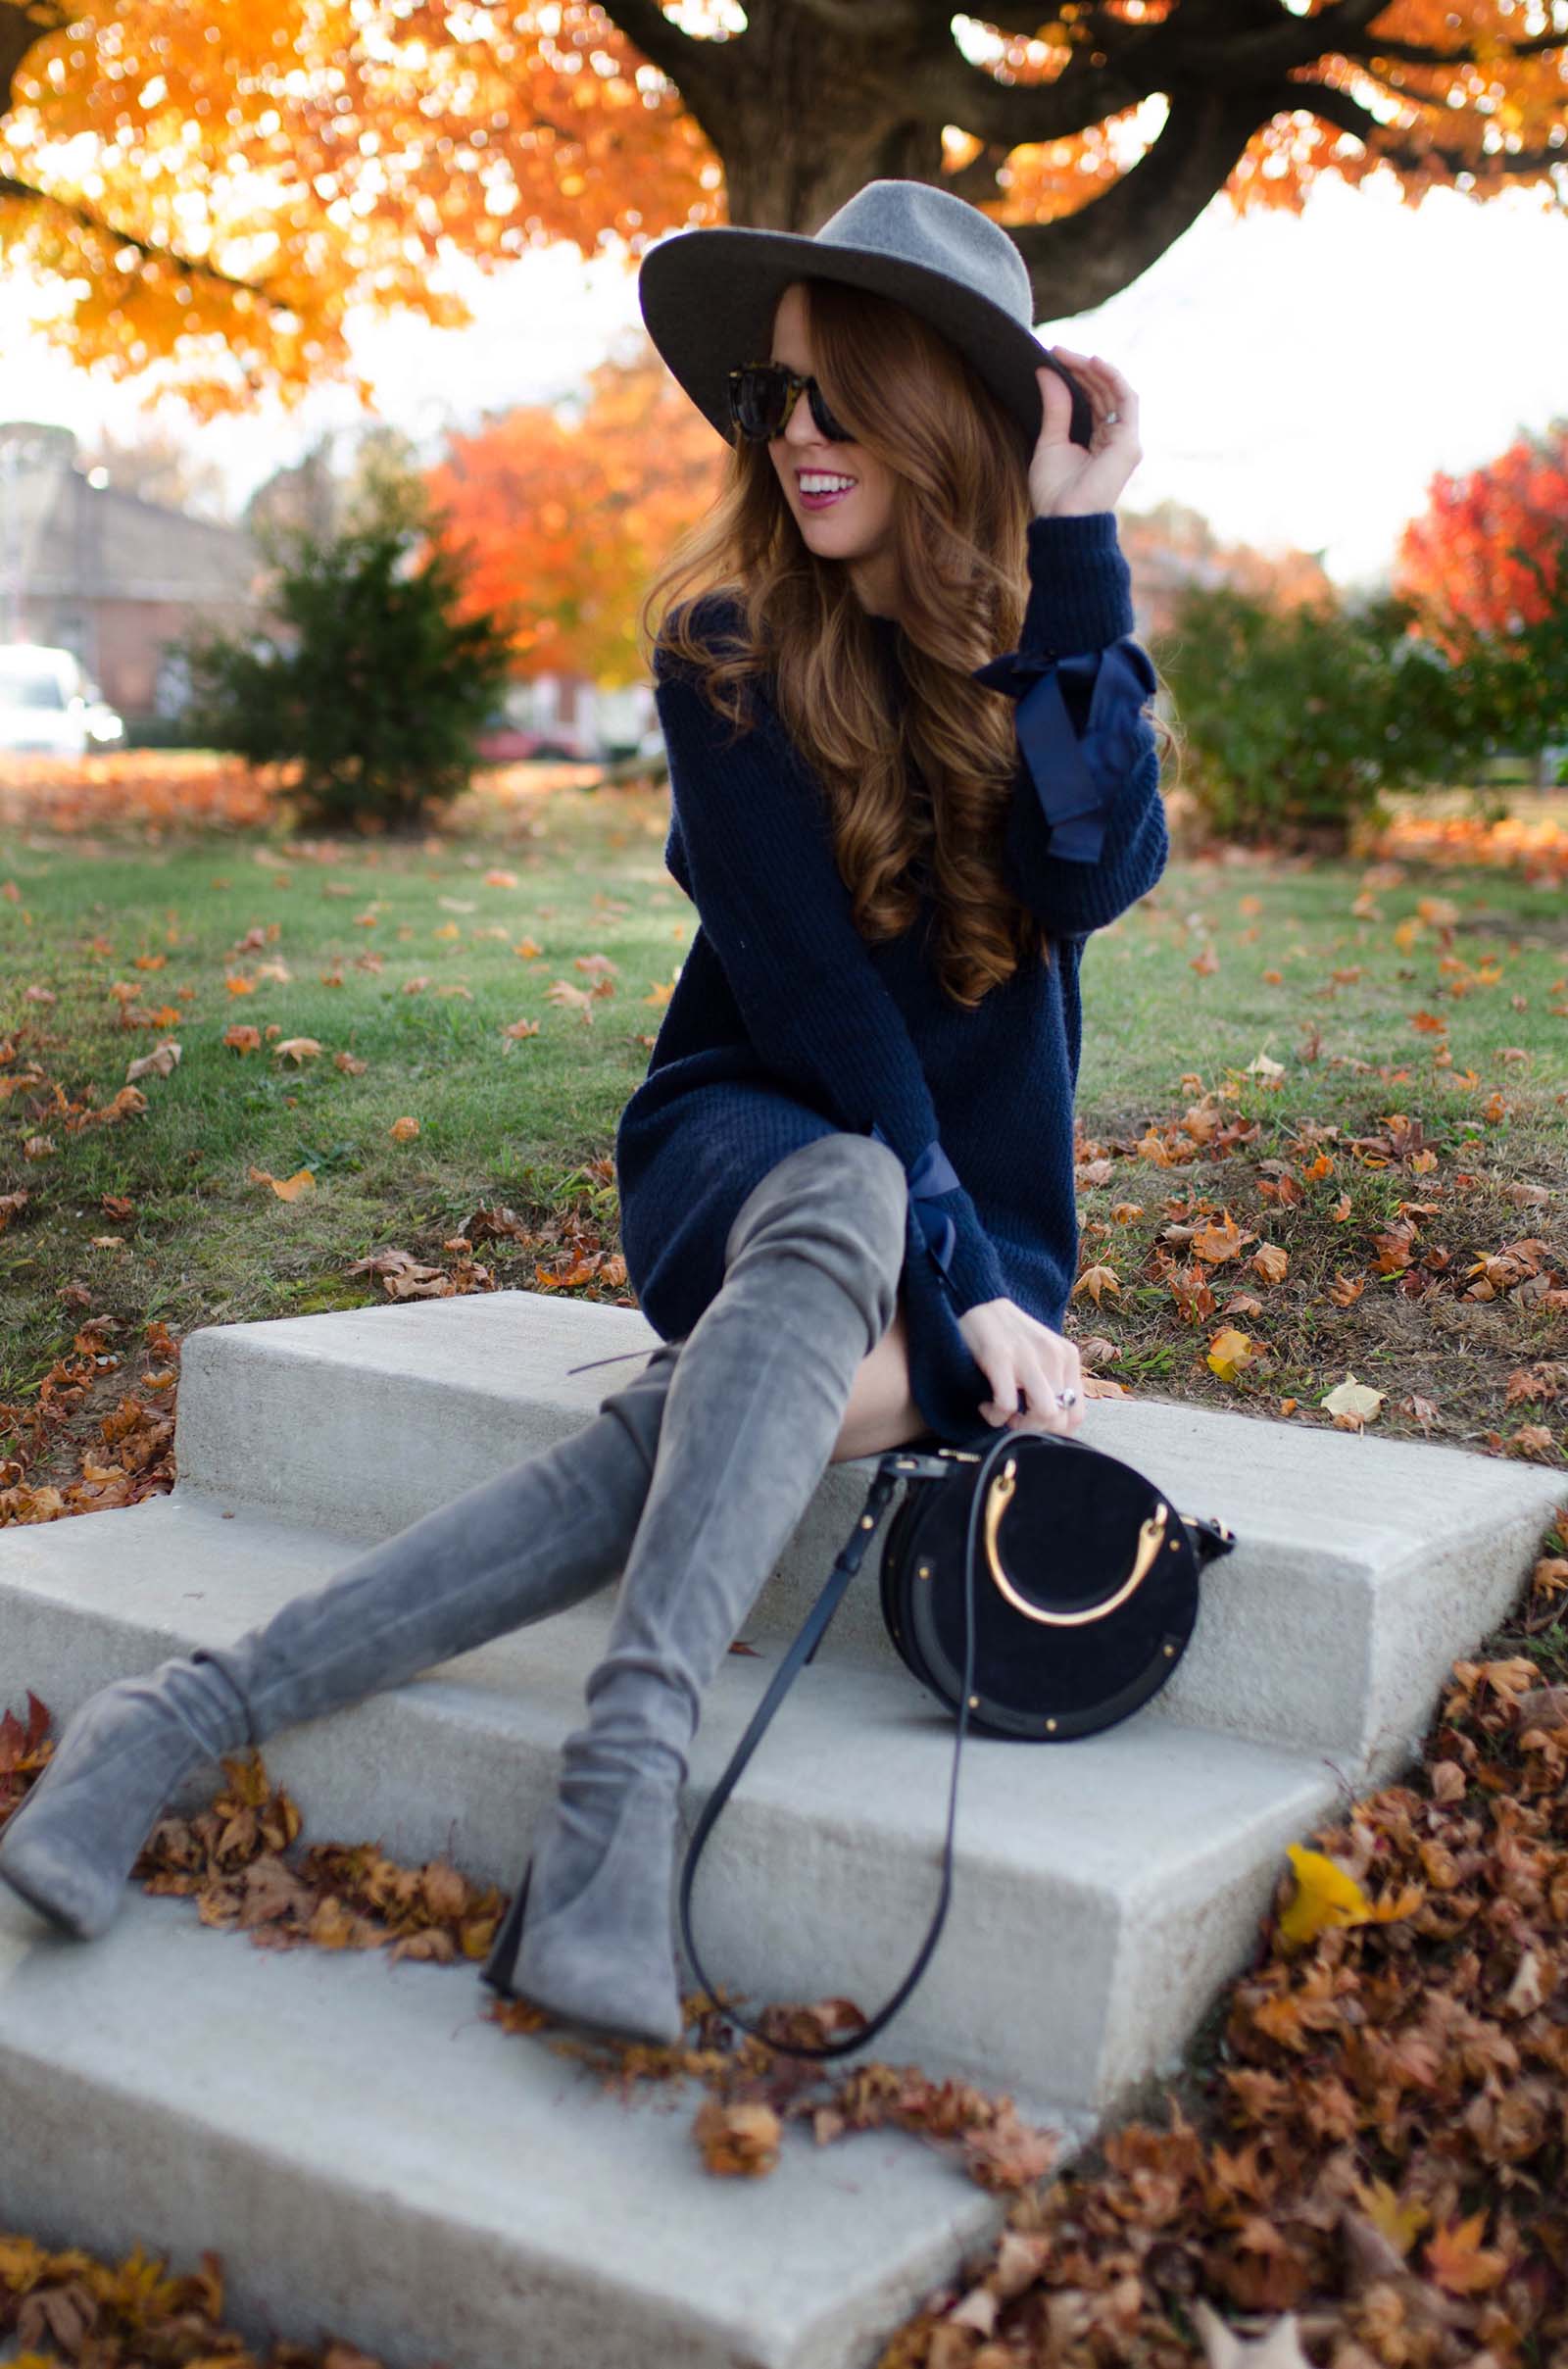 fall-blogger-outfit-pinterst-fall-outfit-nordstrom-swaeter-dress-red-head-blogger